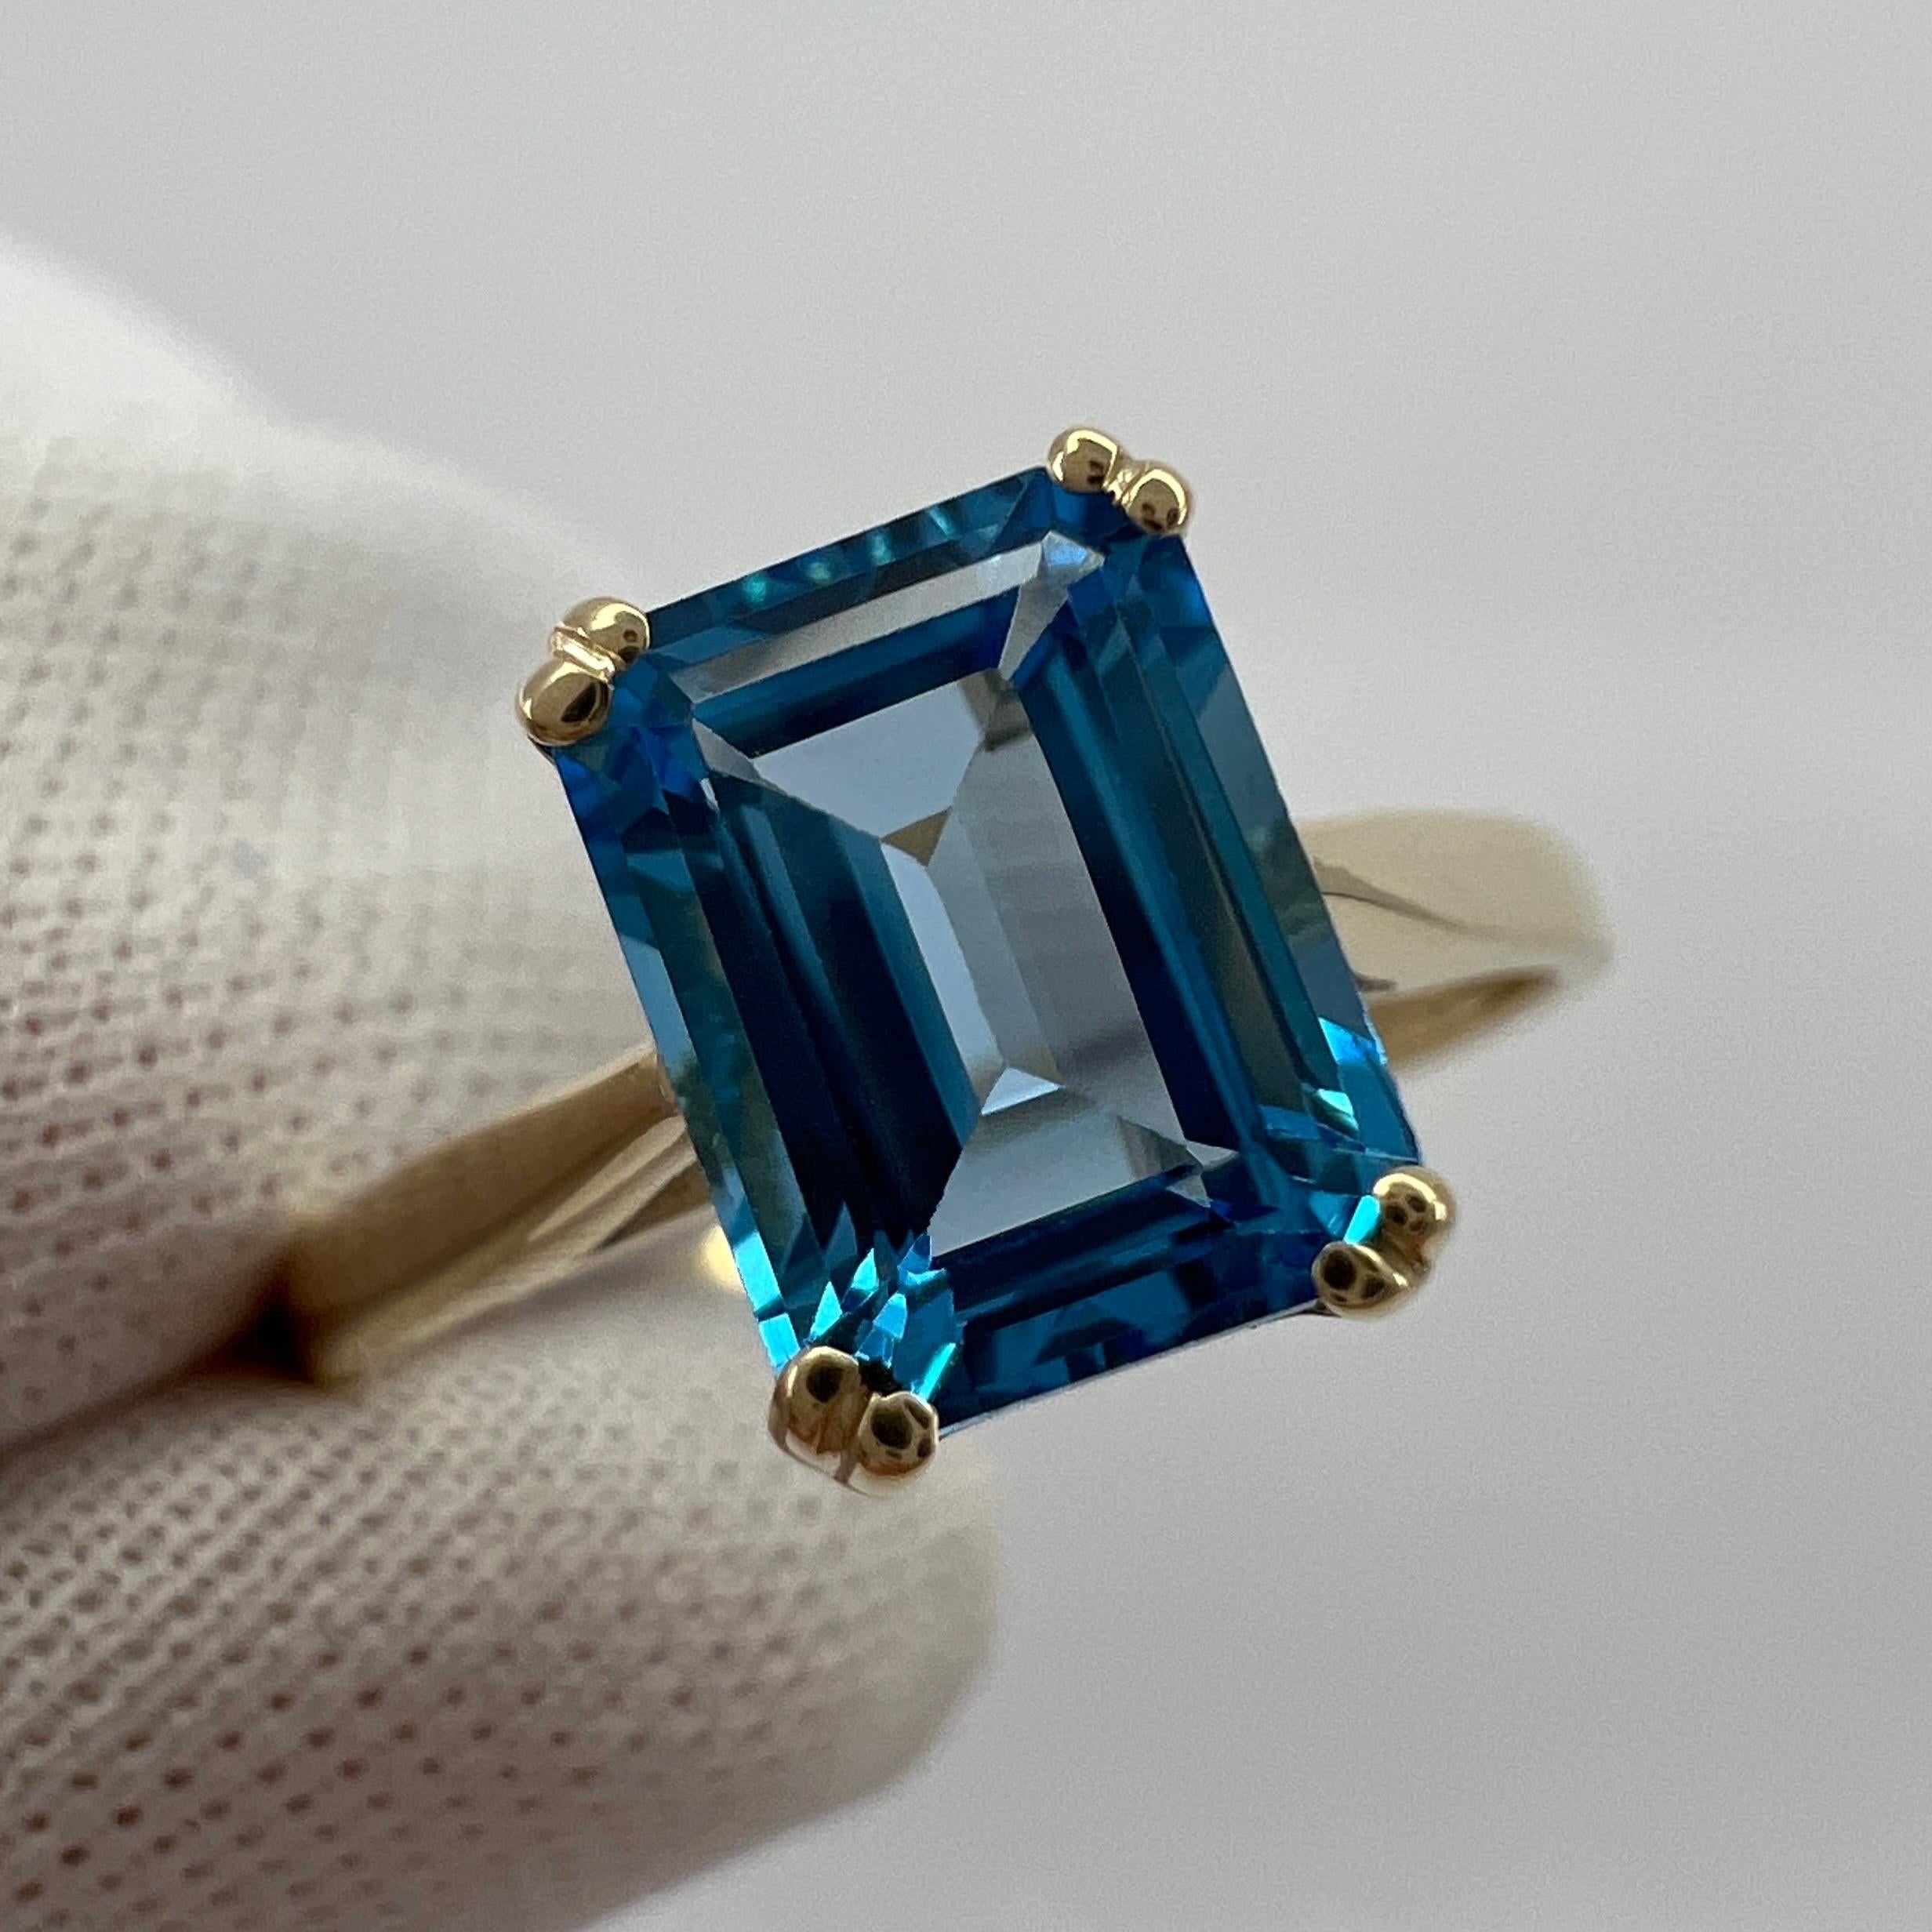 Natural Emerald Octagonal Cut Vivid Swiss Blue Topaz Solitaire Ring.

2.00 Carat topaz with a stunning vivid Swiss blue colour and excellent clarity, very clean stone. Also has an excellent quality emerald octagonal cut which shows the fine colour